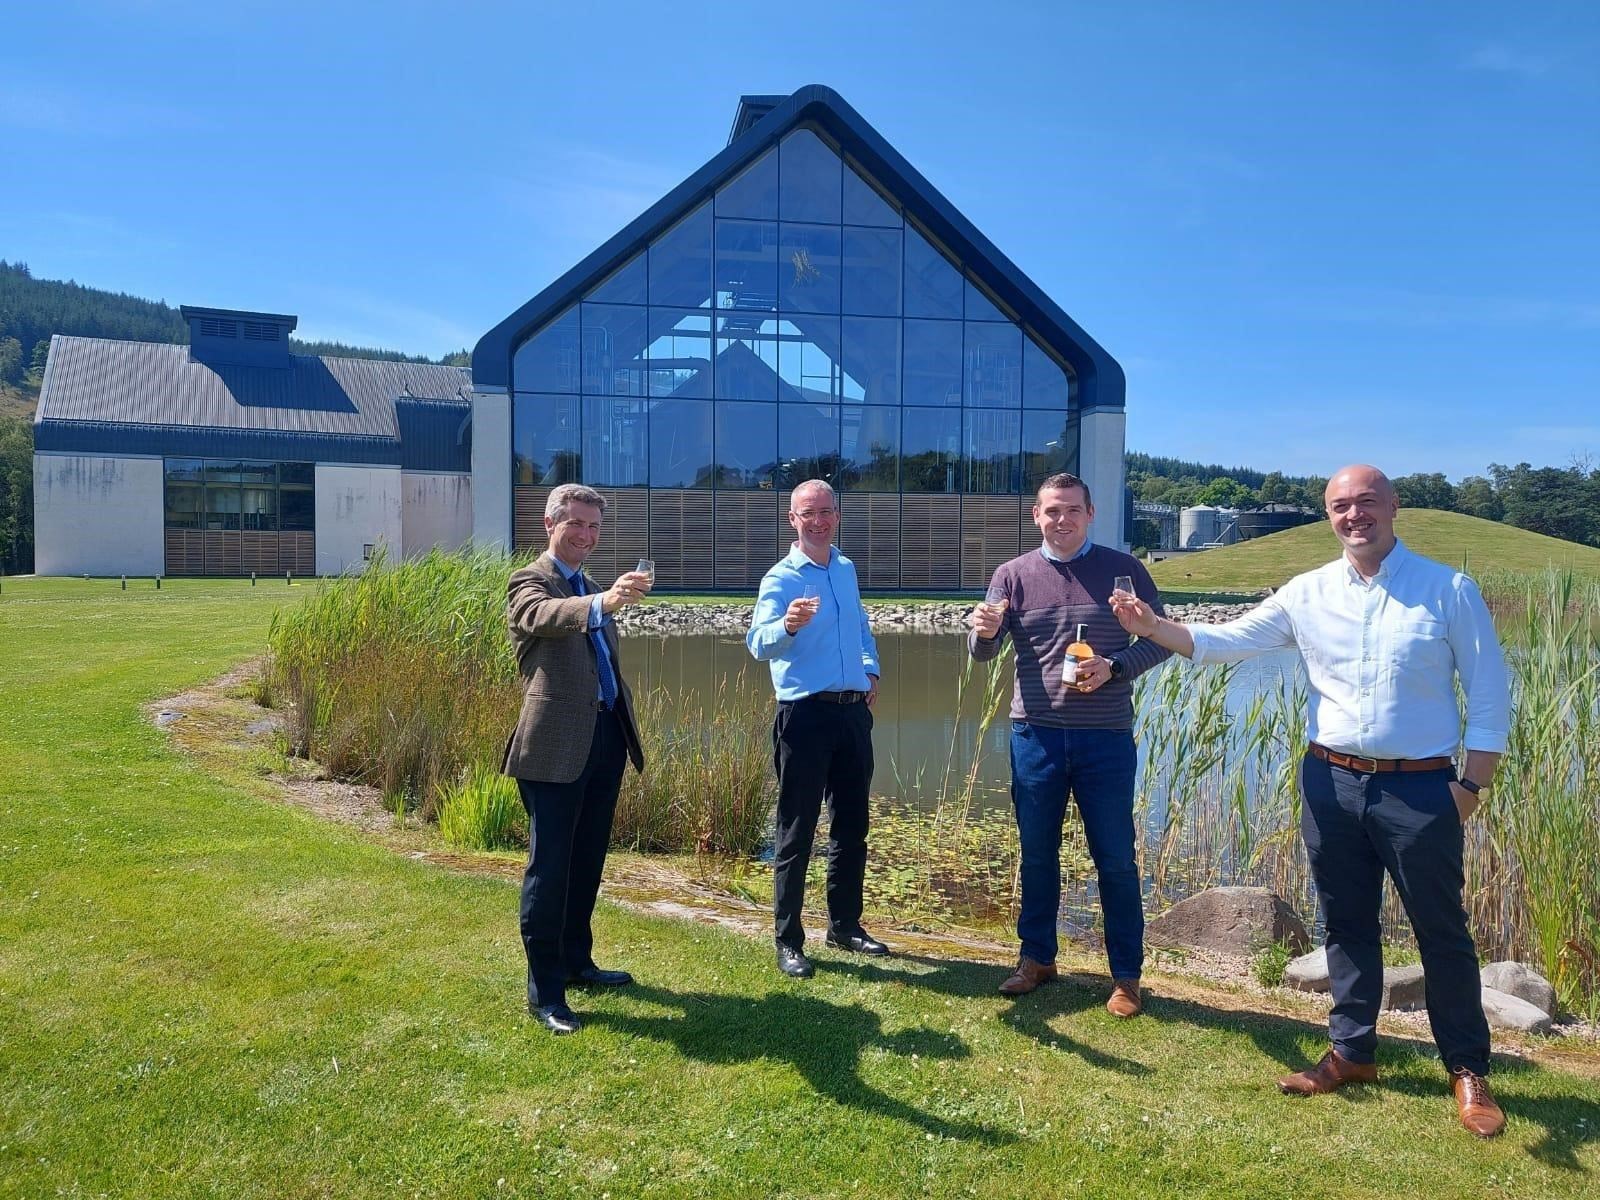 Pictured from left to right: Ronald Daalmans, sustainability manager with Chivas; Graeme Cruikshank, distillery manager with Chivas; Douglas Ross MP; and Graeme Littlejohn from the SWA.